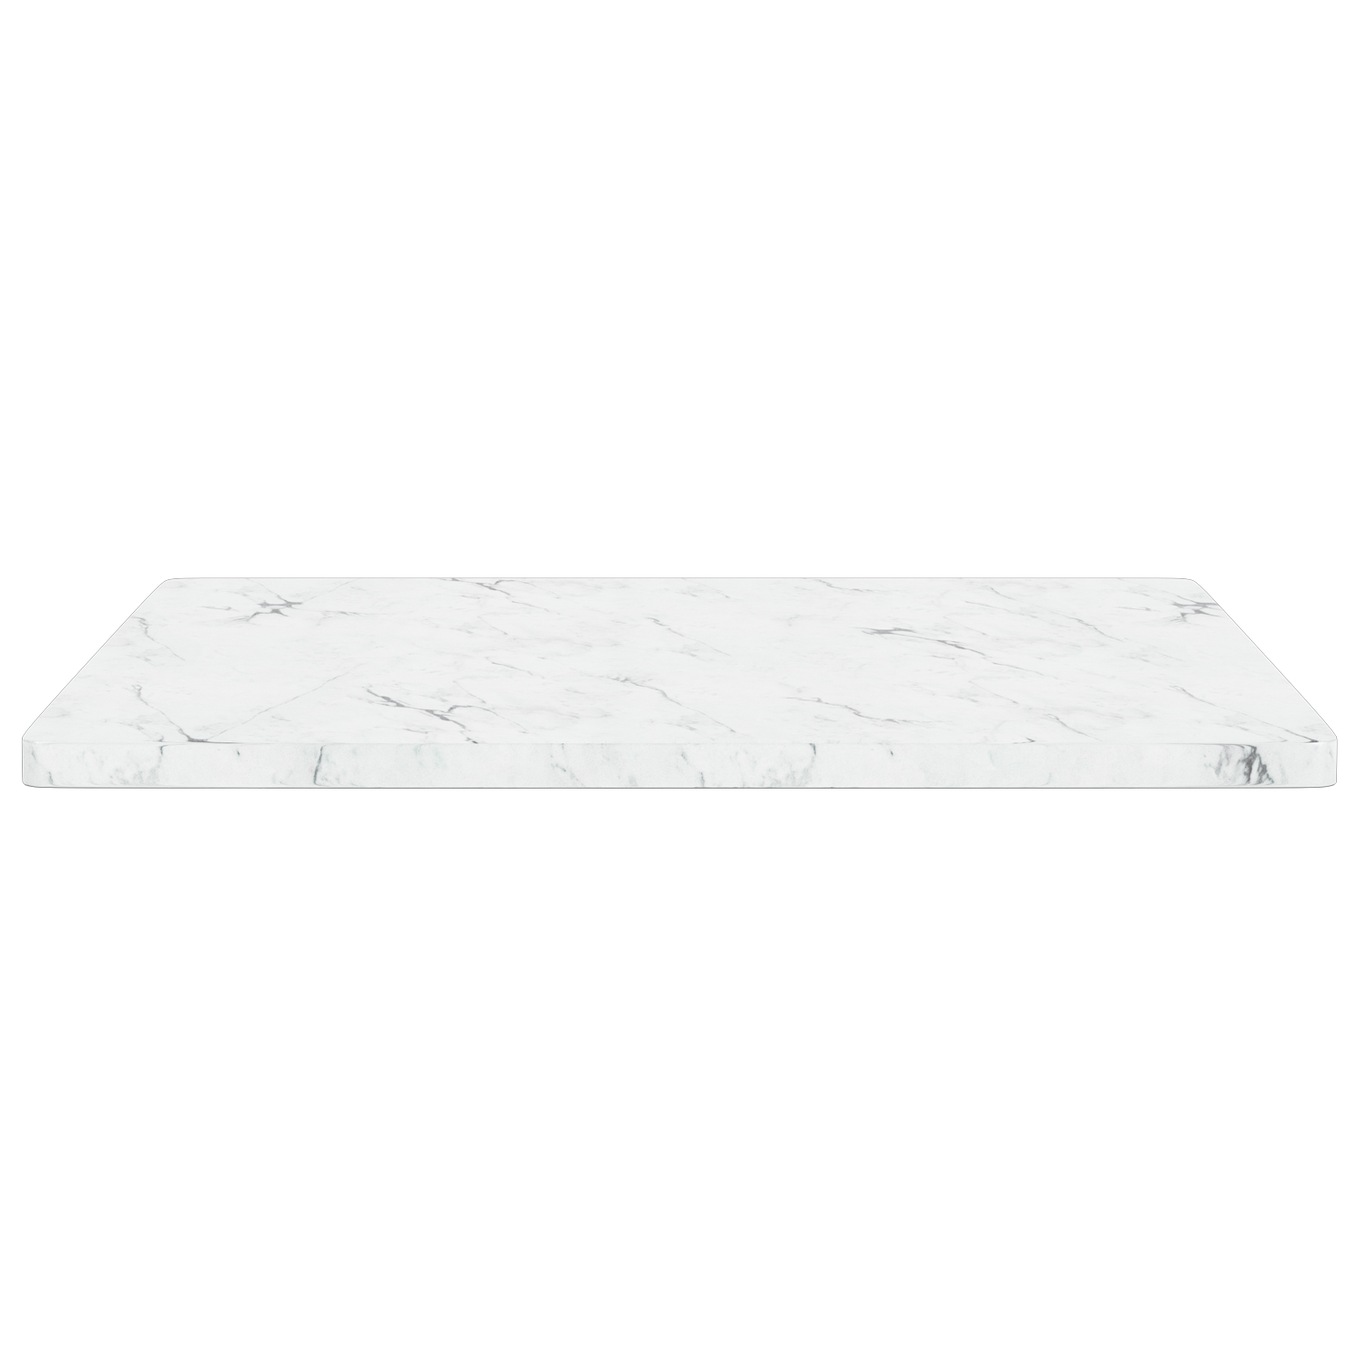 Panton Wire Top Panel D:34, White Marble